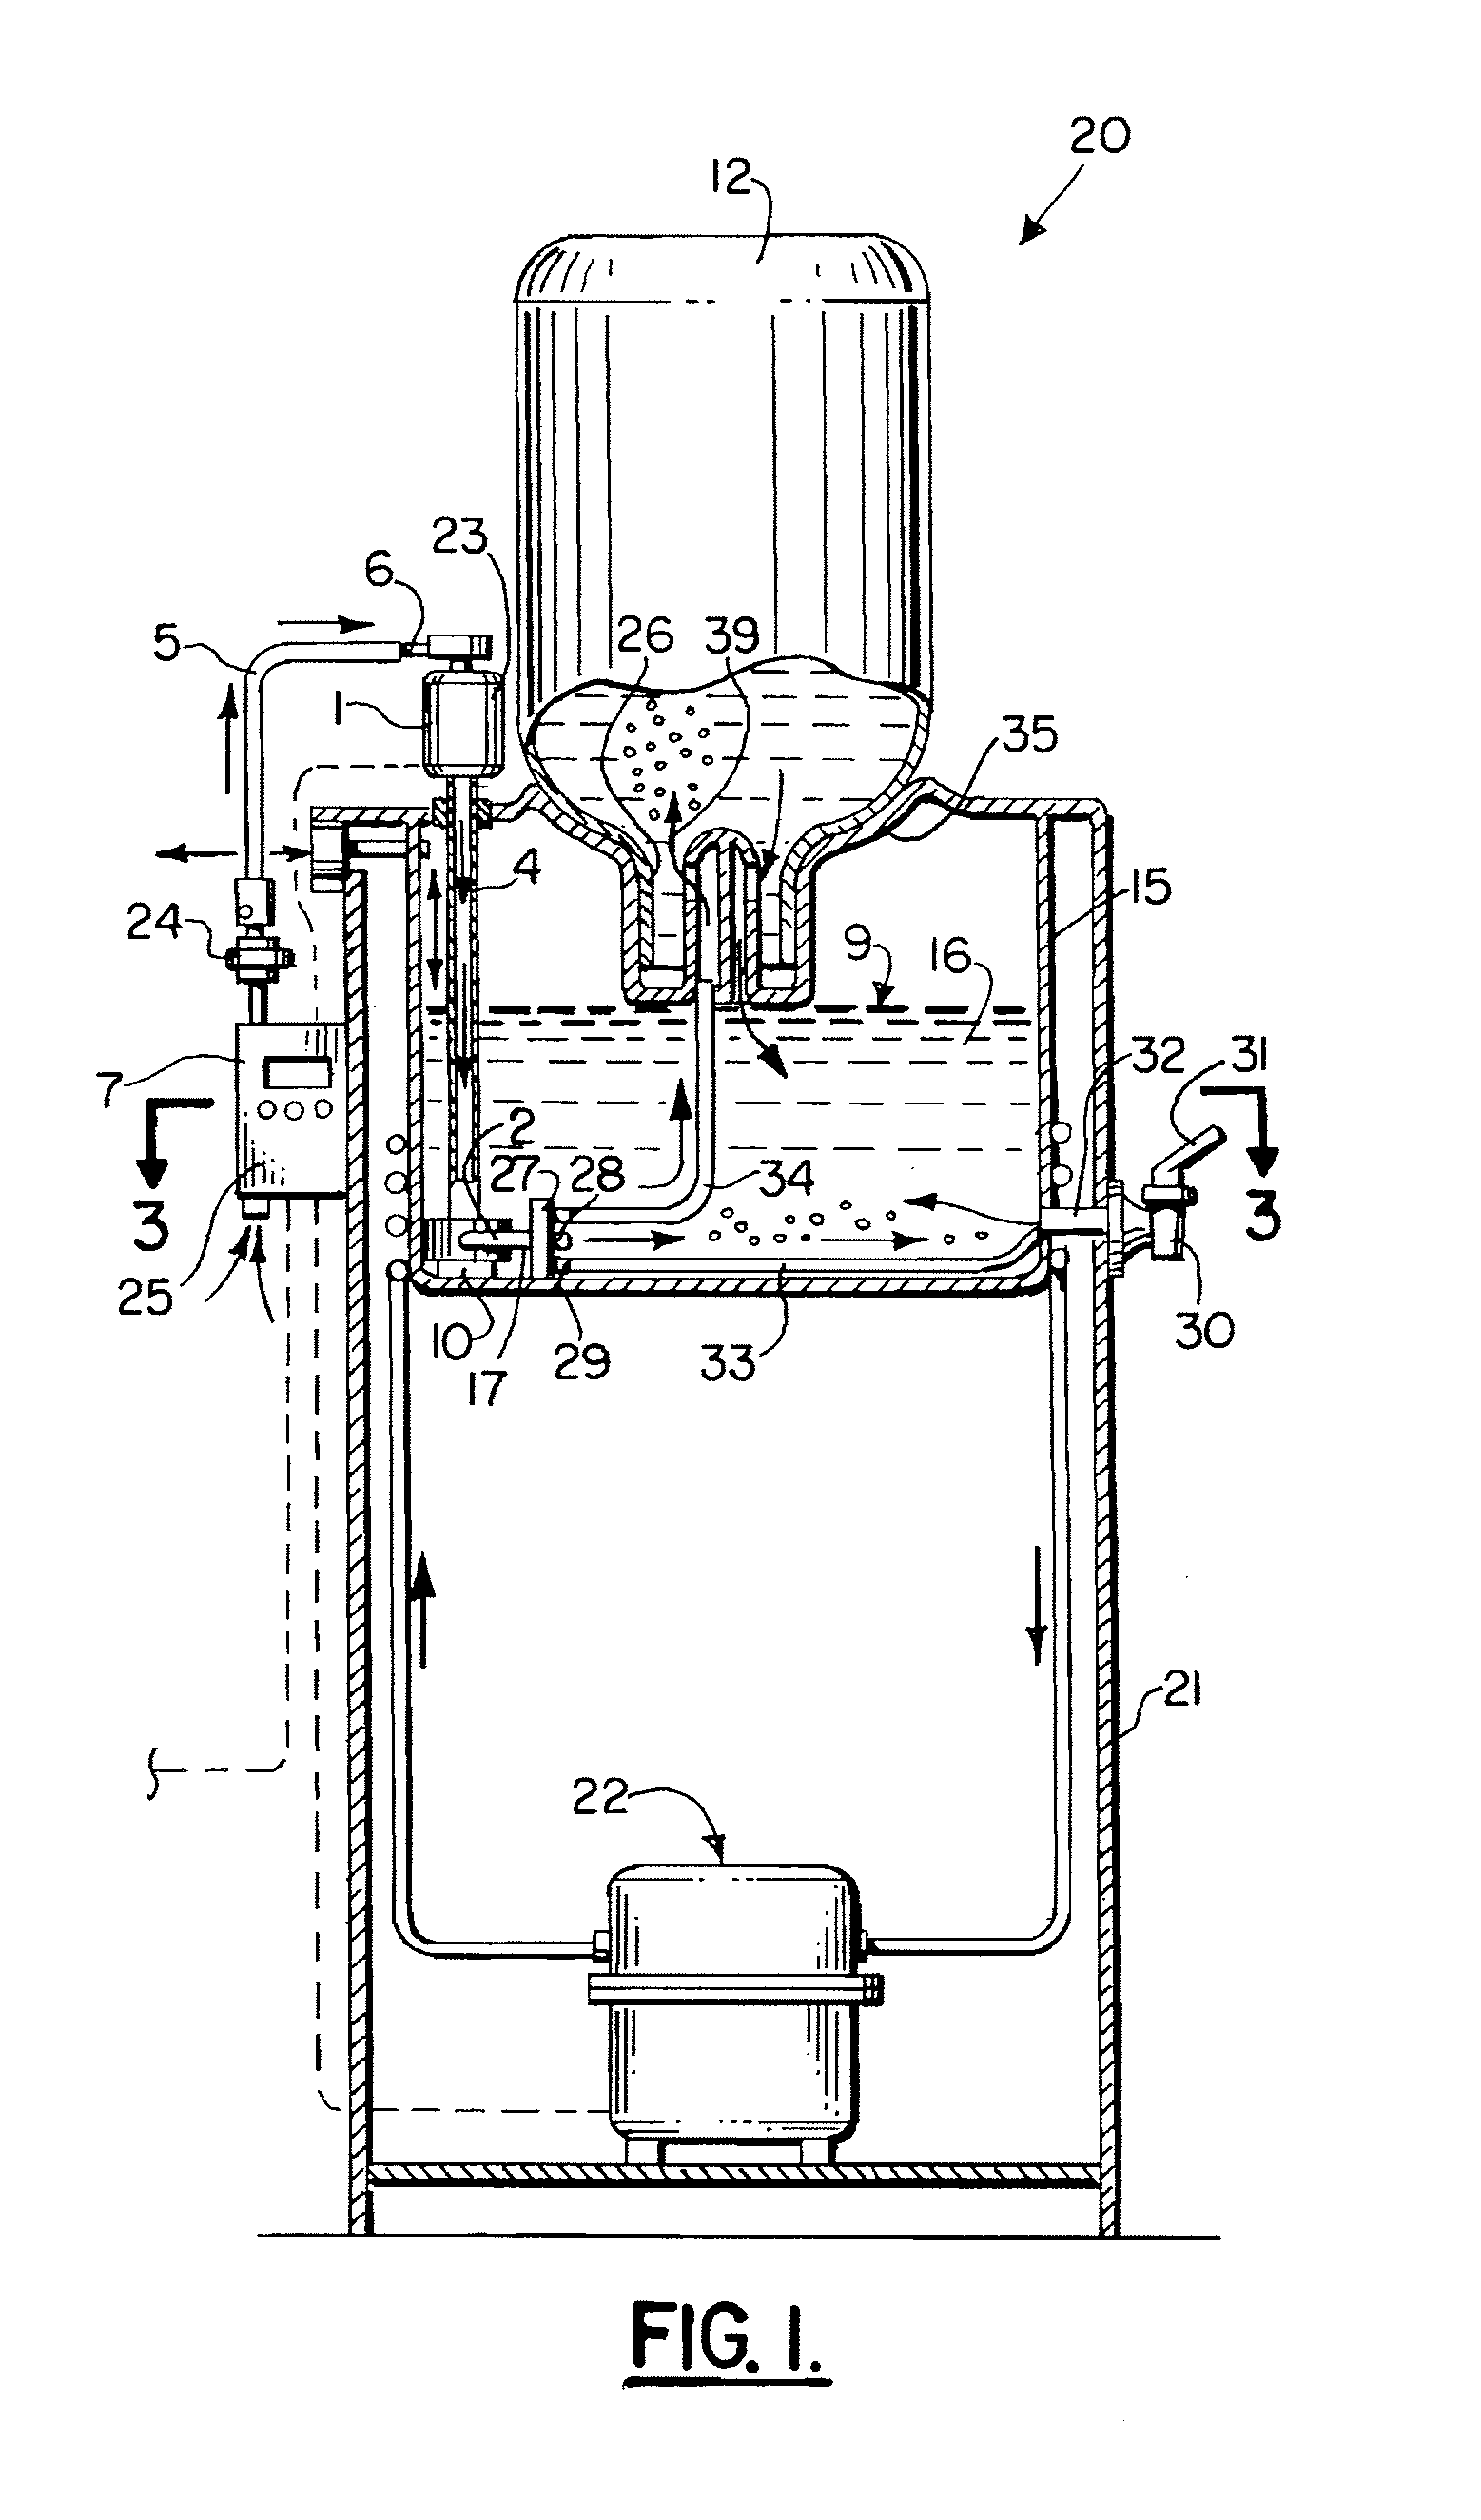 Method and apparatus for sanitizing water dispensed from a water dispenser having a reservoir